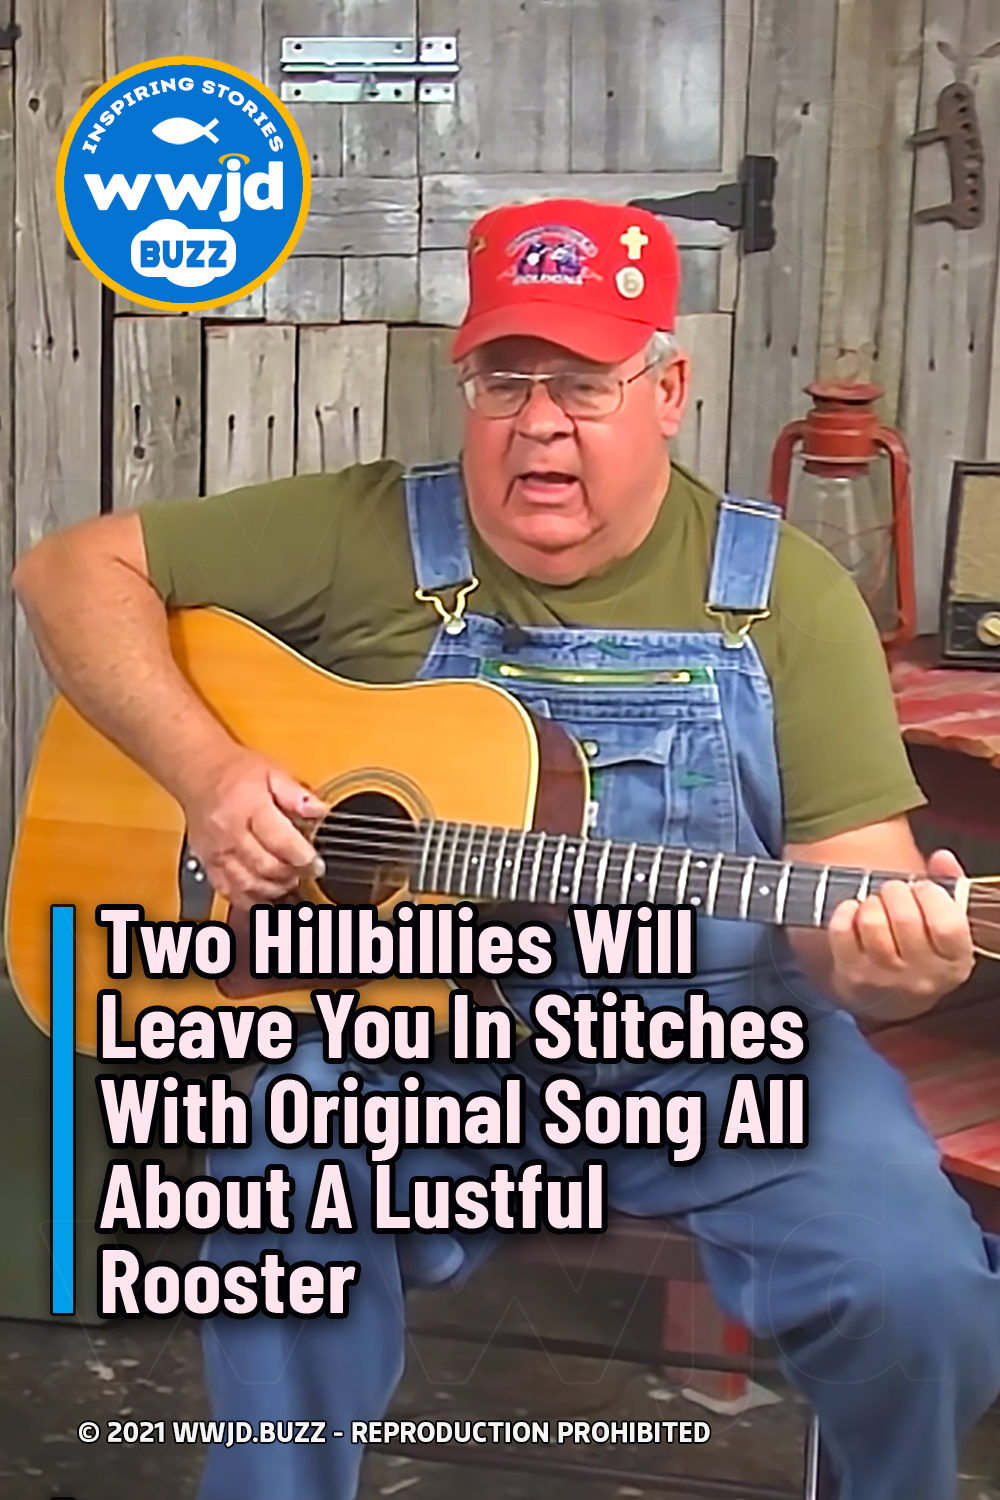 Two Hillbillies Will Leave You In Stitches With Original Song All About A Lustful Rooster